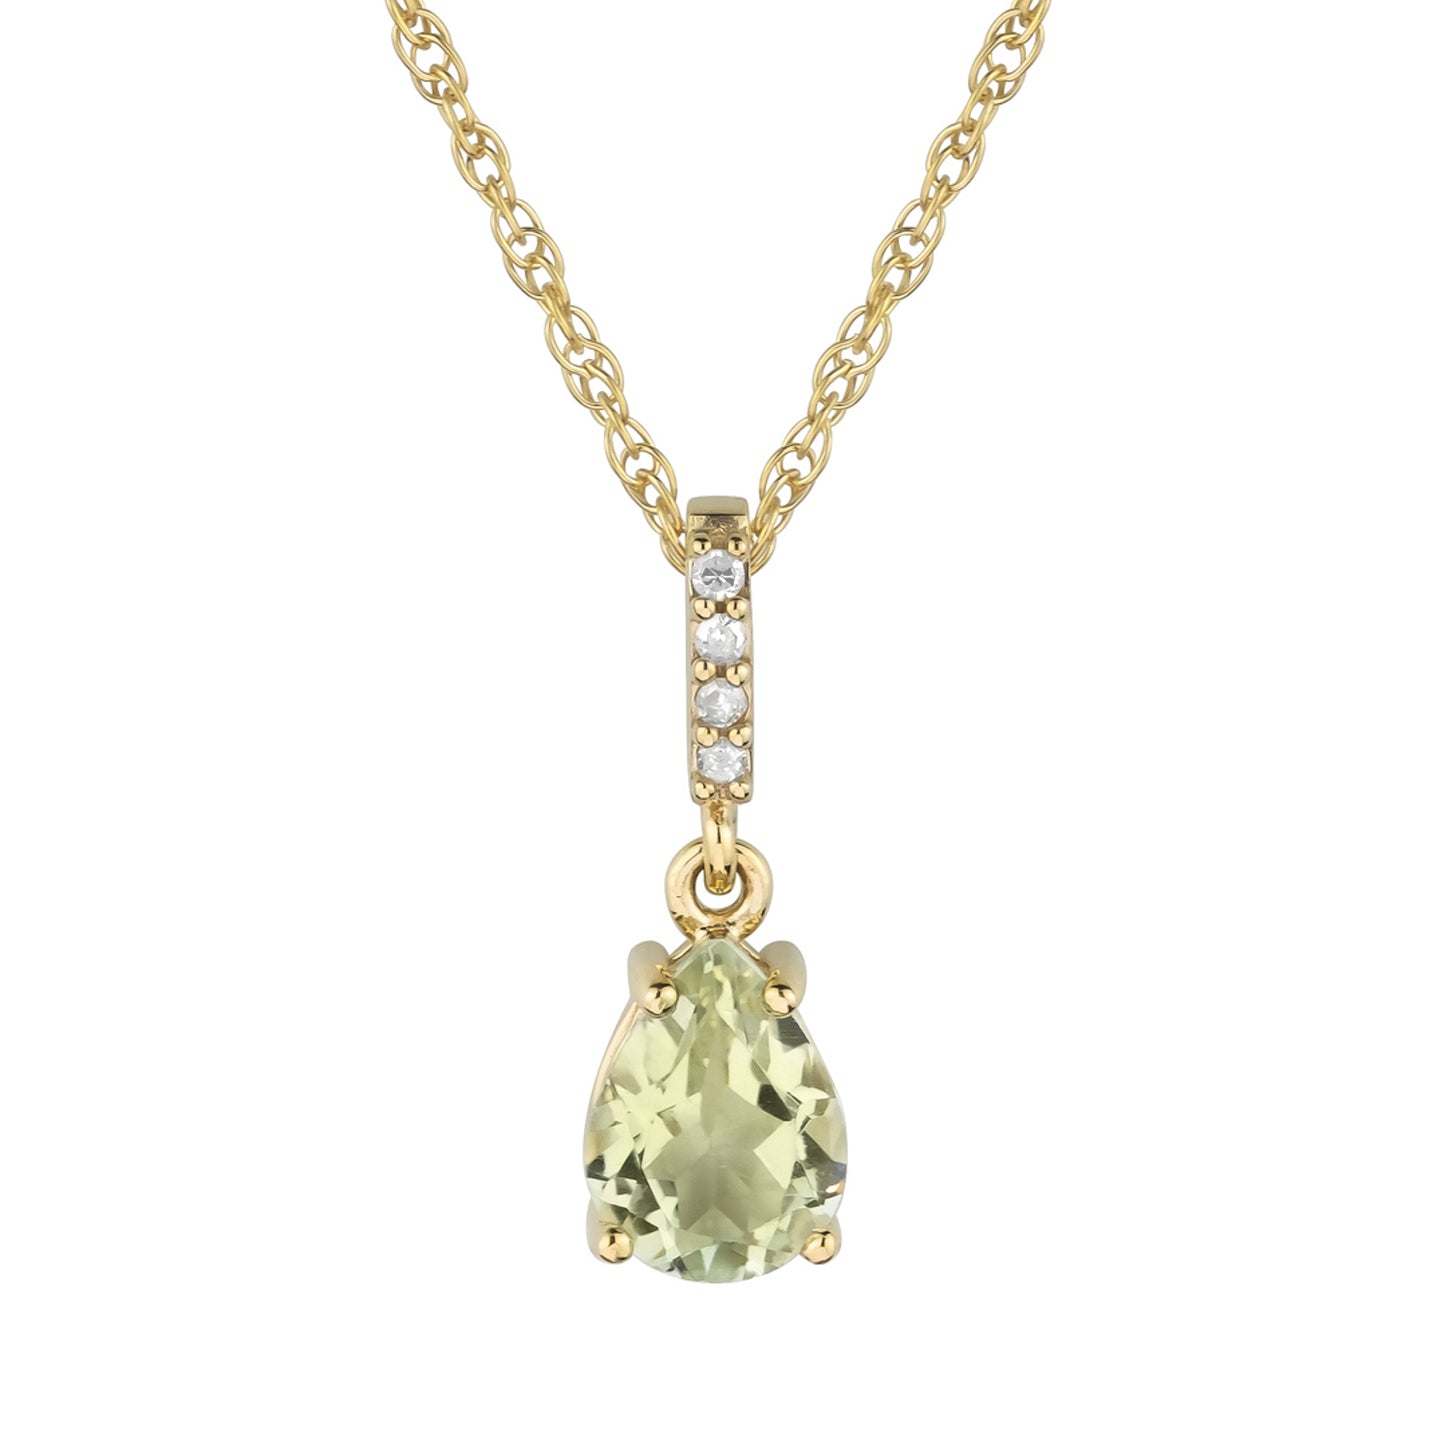 10k Yellow Gold Genuine Pear Shape Green Amethyst and Diamond Drop Pendant Necklace